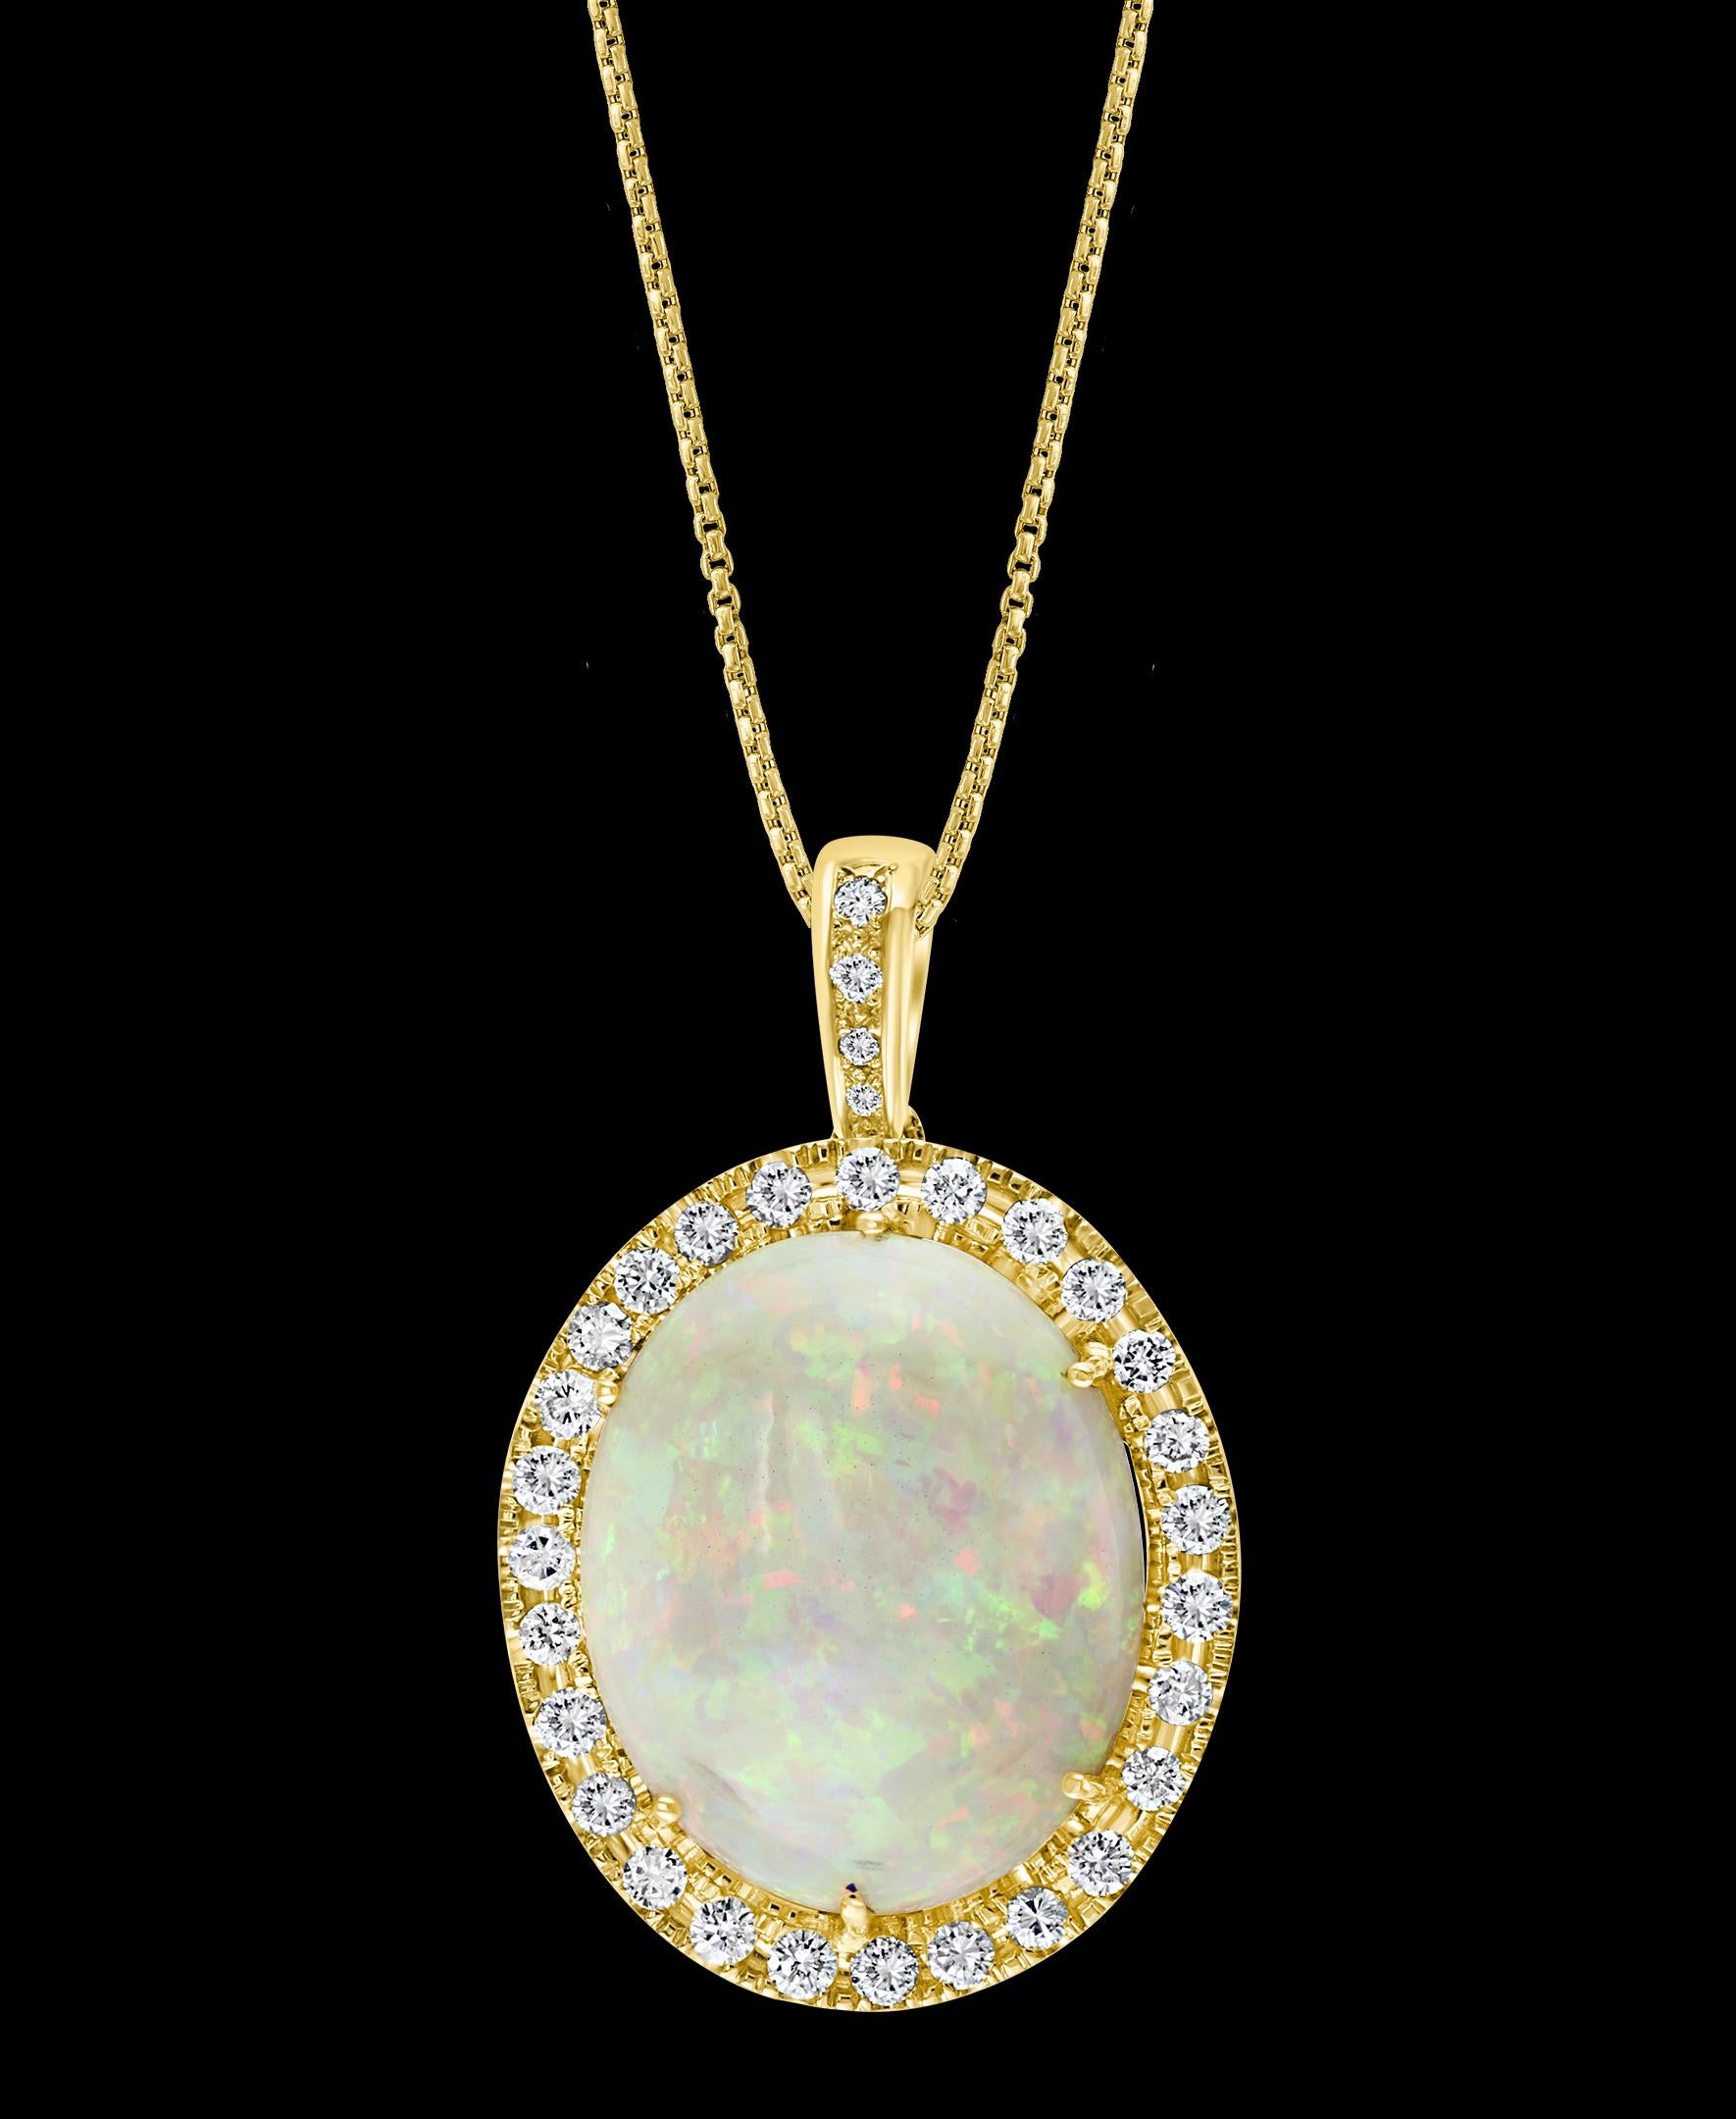 52.70 Carat Oval Ethiopian Opal & Diamond Pendant / Necklace 18 Karat Gold Estate yellow Gold 
This spectacular Pendant Necklace consisting of a single Oval Shape Ethiopian Opal Approximately 52.70 Carat. The Opal is surrounded by approximately 3.6